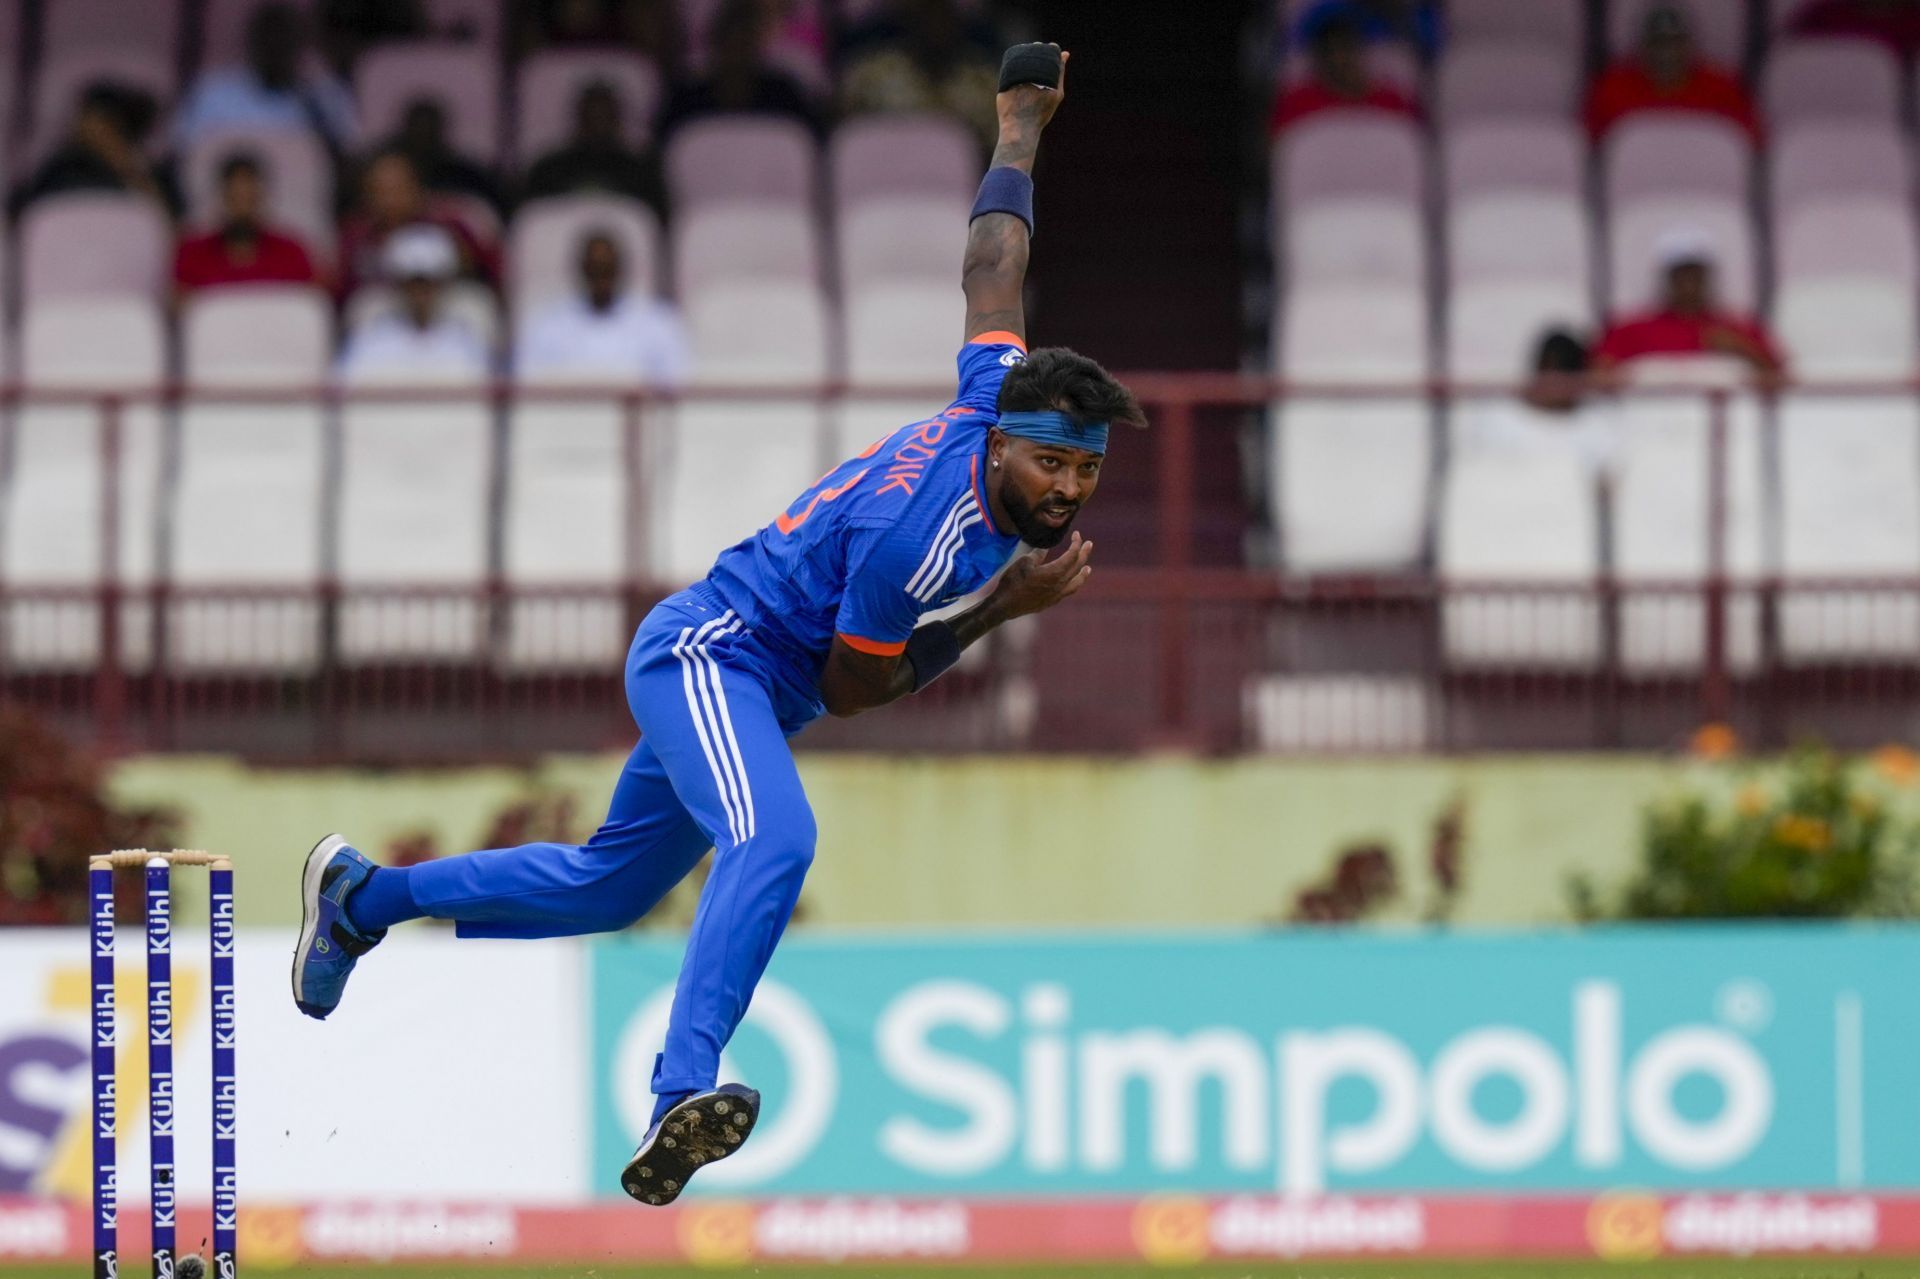 India captain Hardik Pandya bowled only one over in Florida